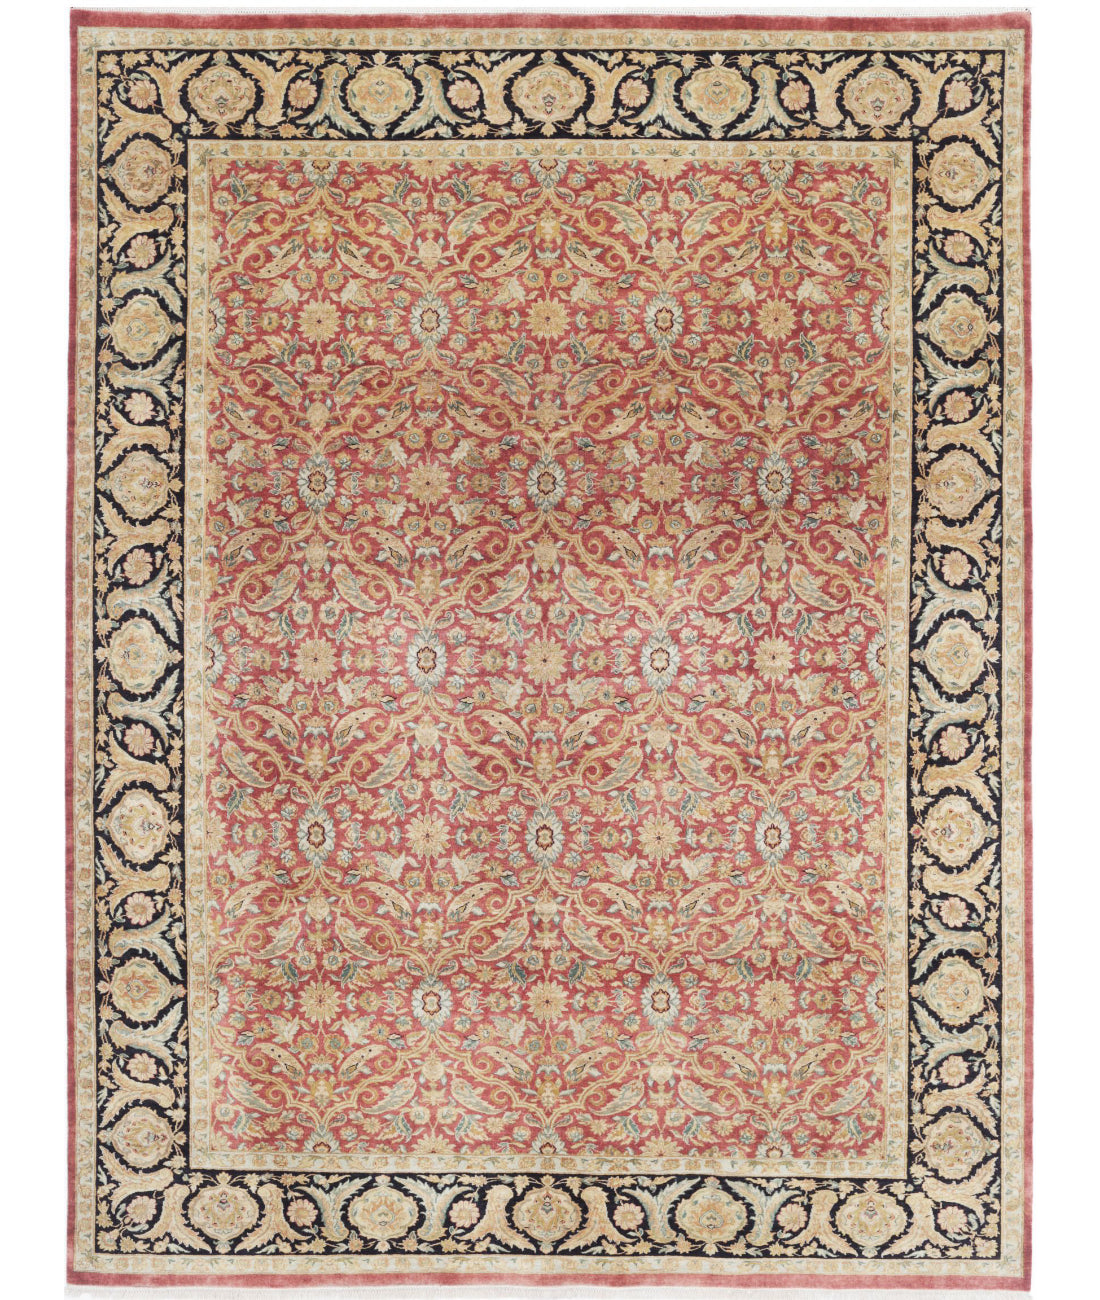 Hand Knotted Agra Wool Rug - 8'10'' x 11'8'' 8'10'' x 11'8'' (265 X 345) / Red / Black